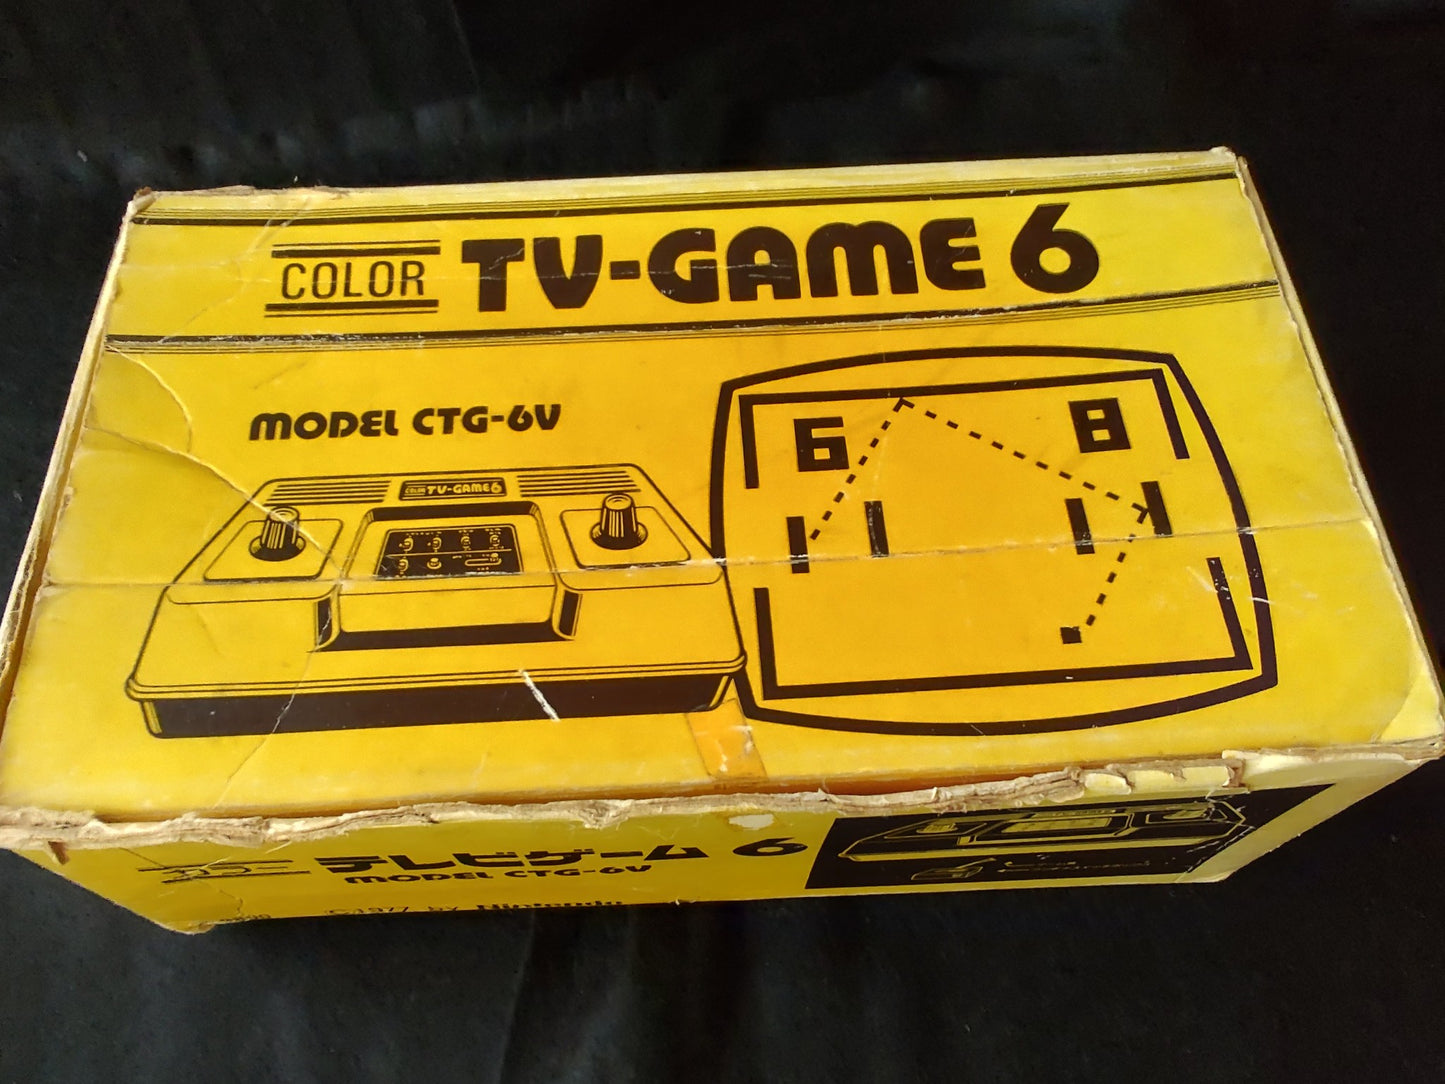 Nintendo TV GAME 6 (CTG-6V) Console,RF switch,Manual,Boxed set Tested-f0529-